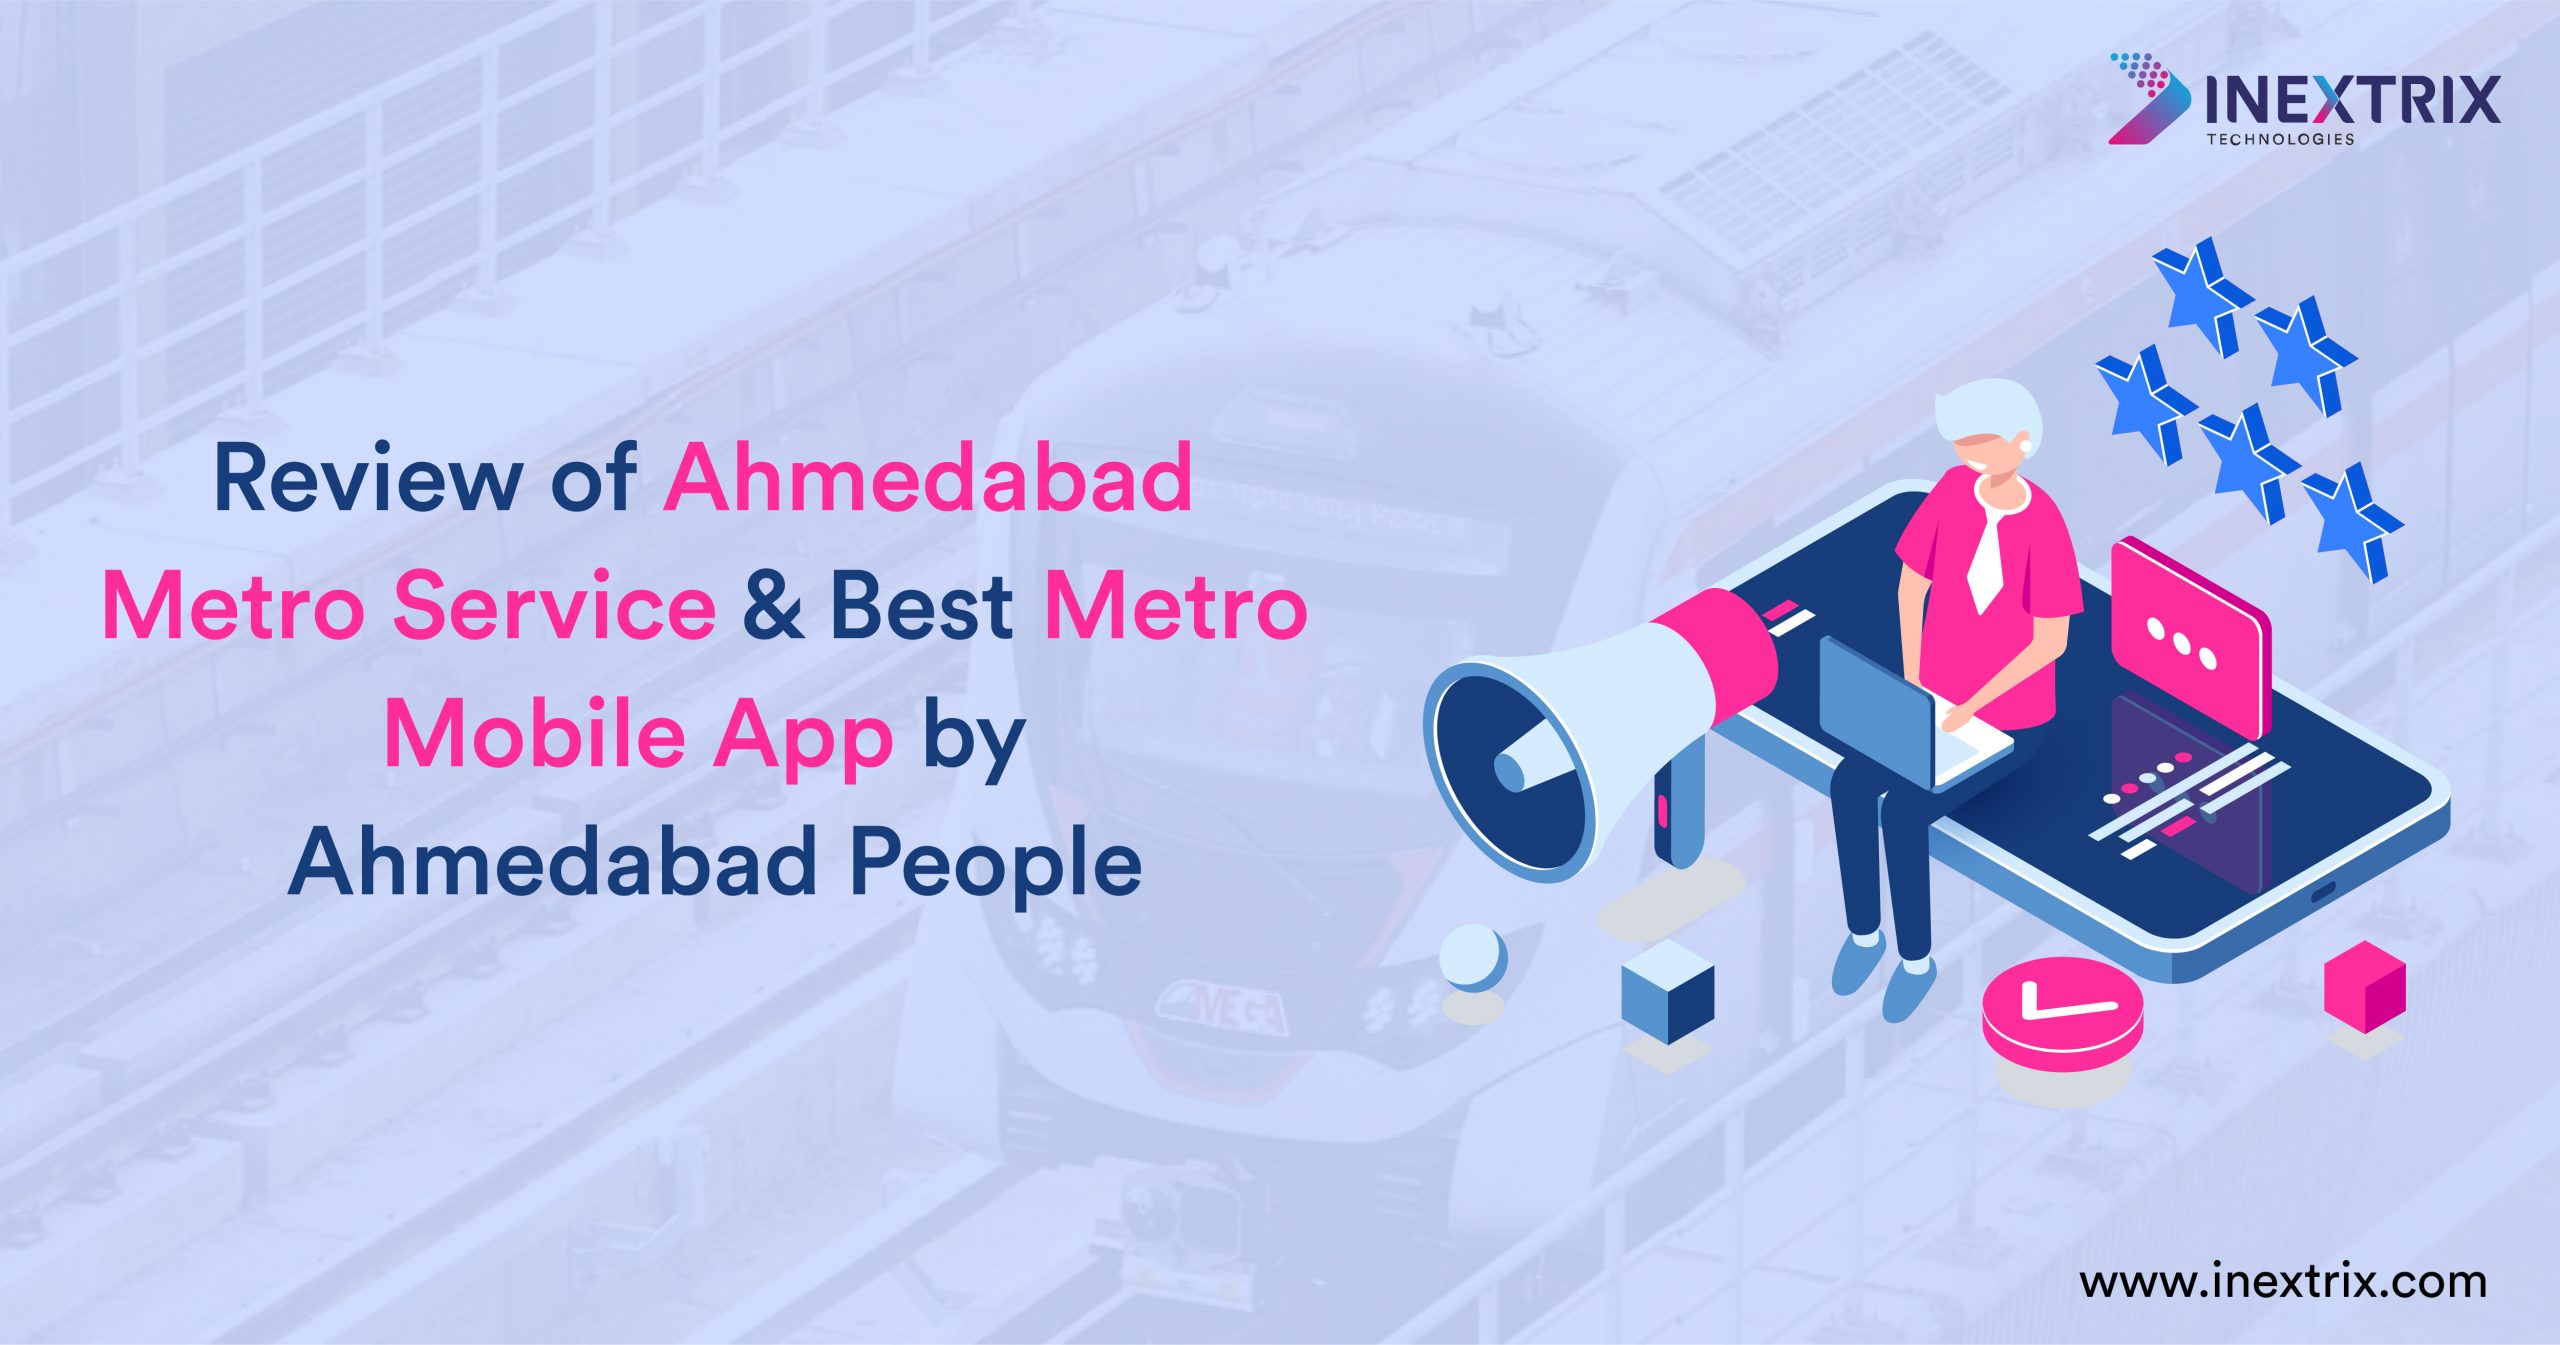 Review of Ahmedabad Metro Service and Best Metro Mobile App by Ahmedabad People